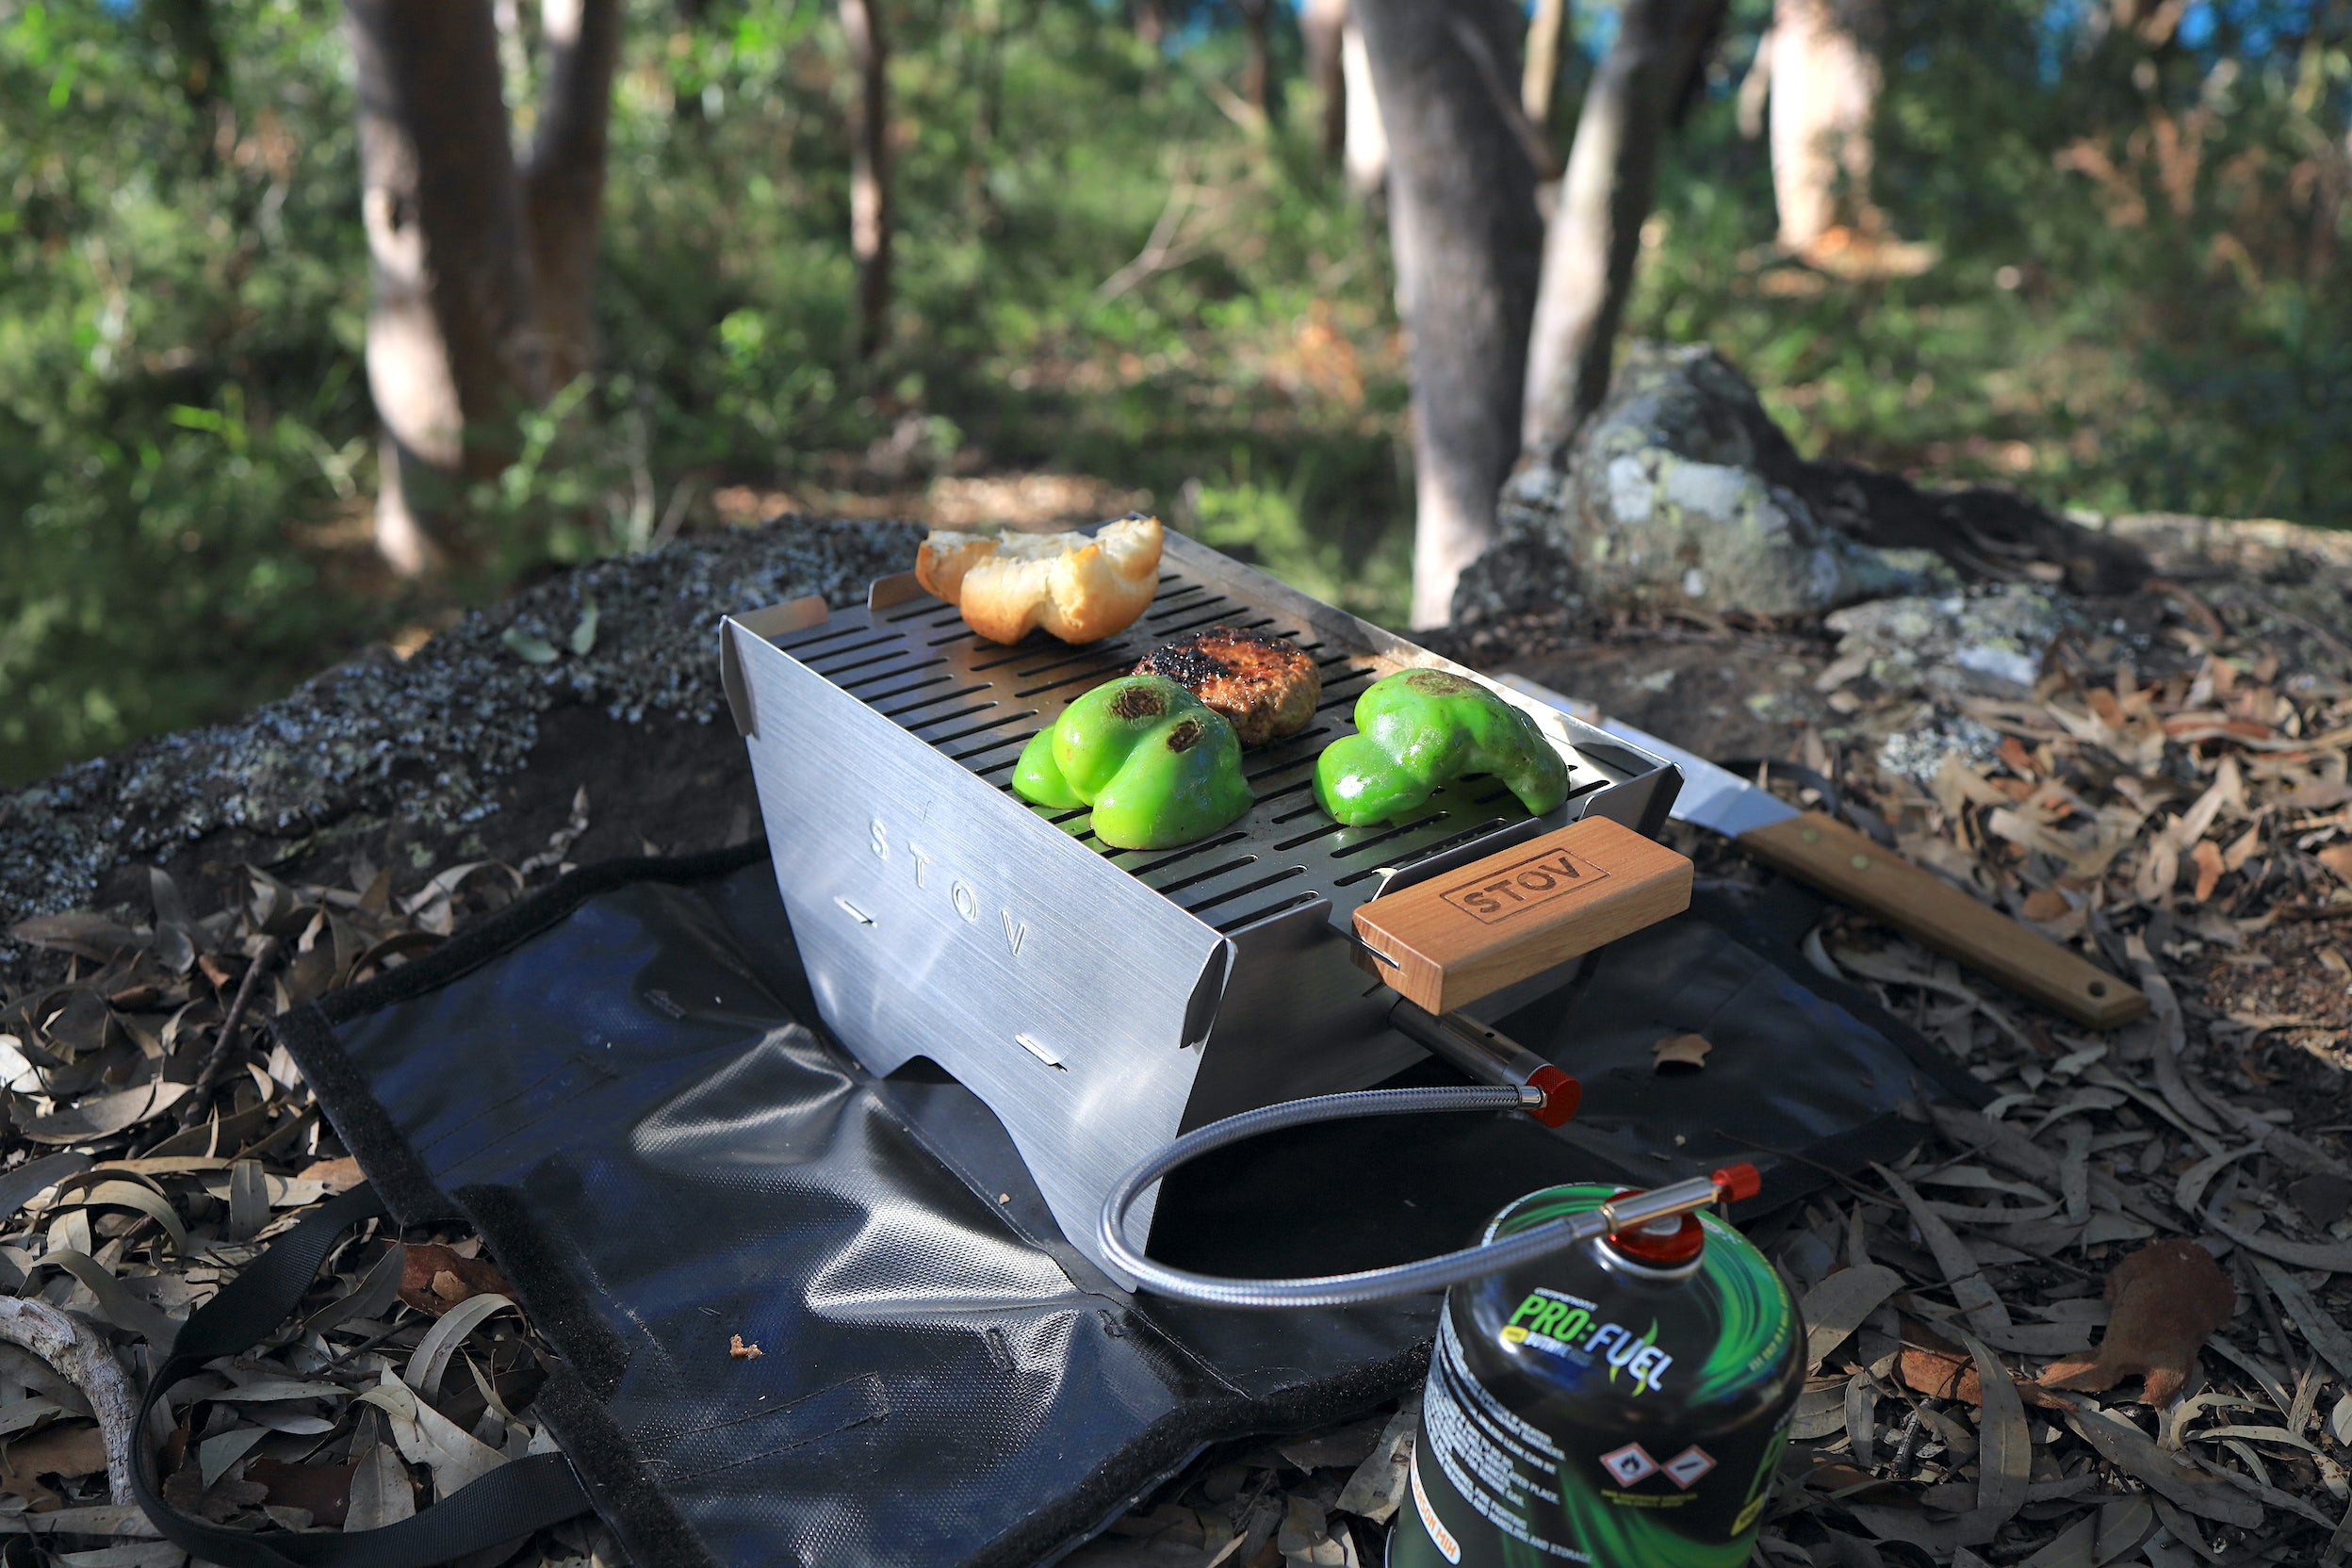 Already a great barbecue under the portable BBQs that suit everyones outdoor cooking experience